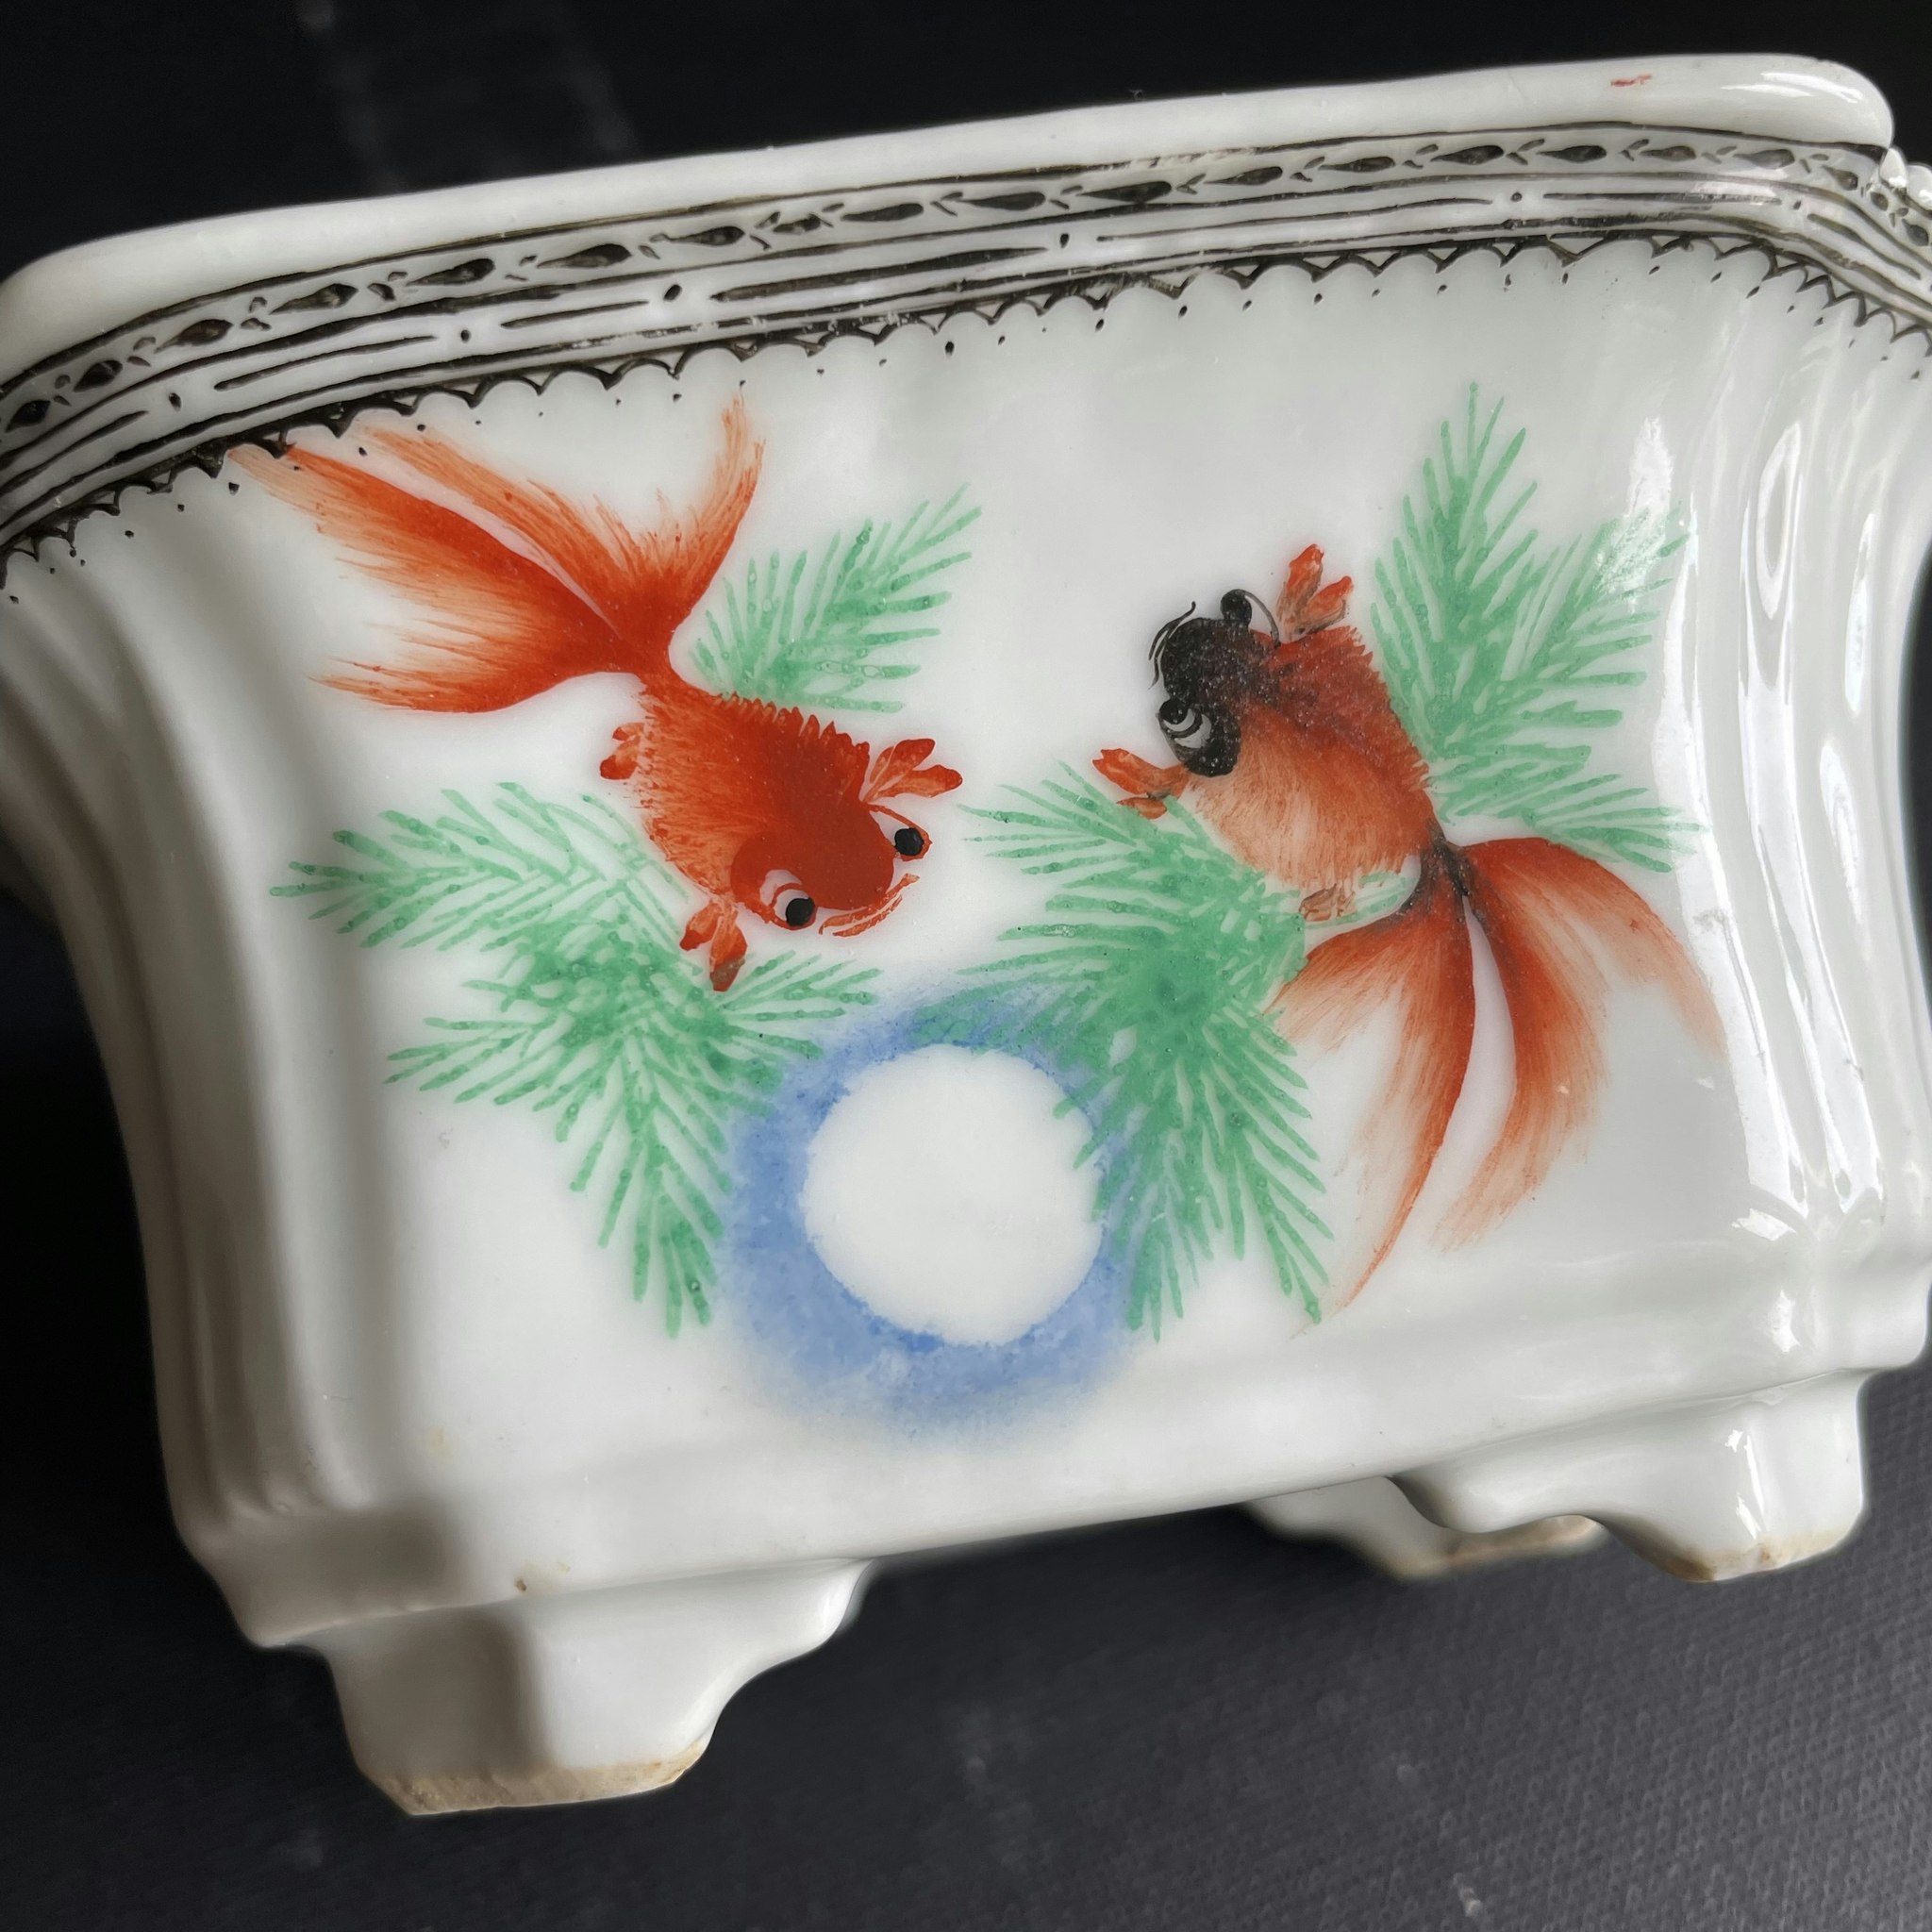 Chinese rectangular porcelain planter Second Half of 1900's 50's 60's #1177